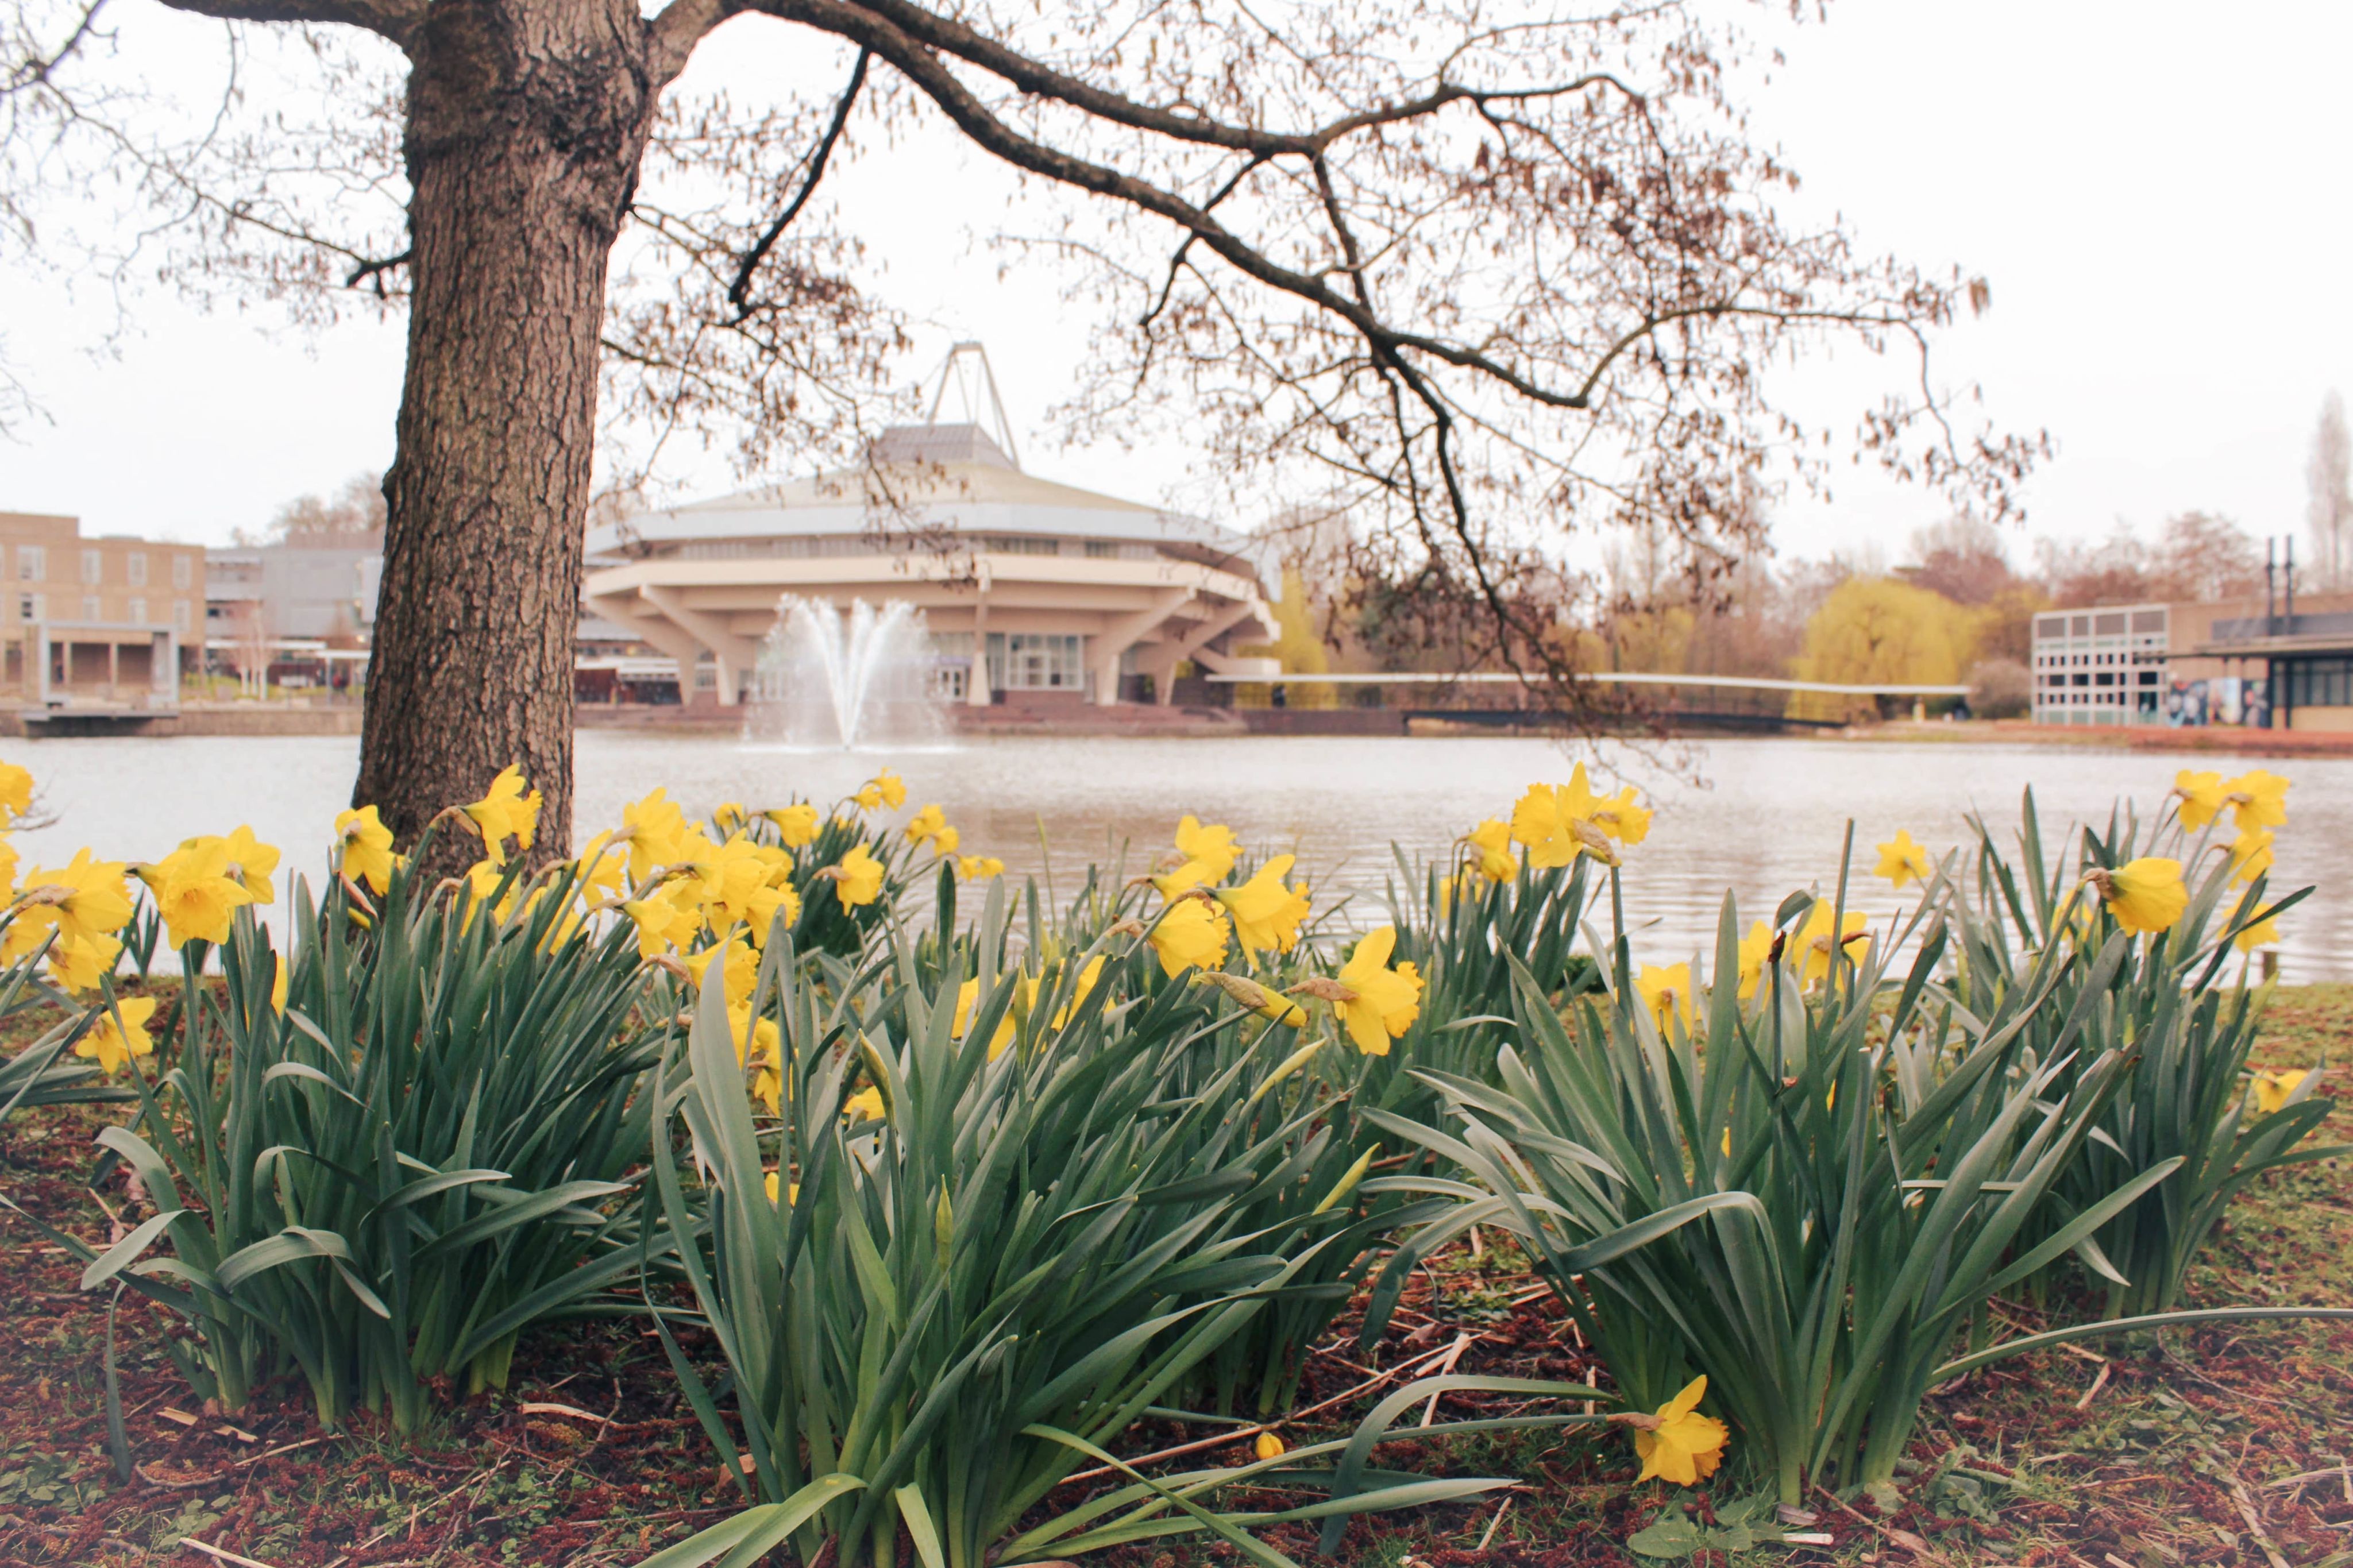 A view of central hall with the fountain running in front of it from the perspective of daffodils across the lake